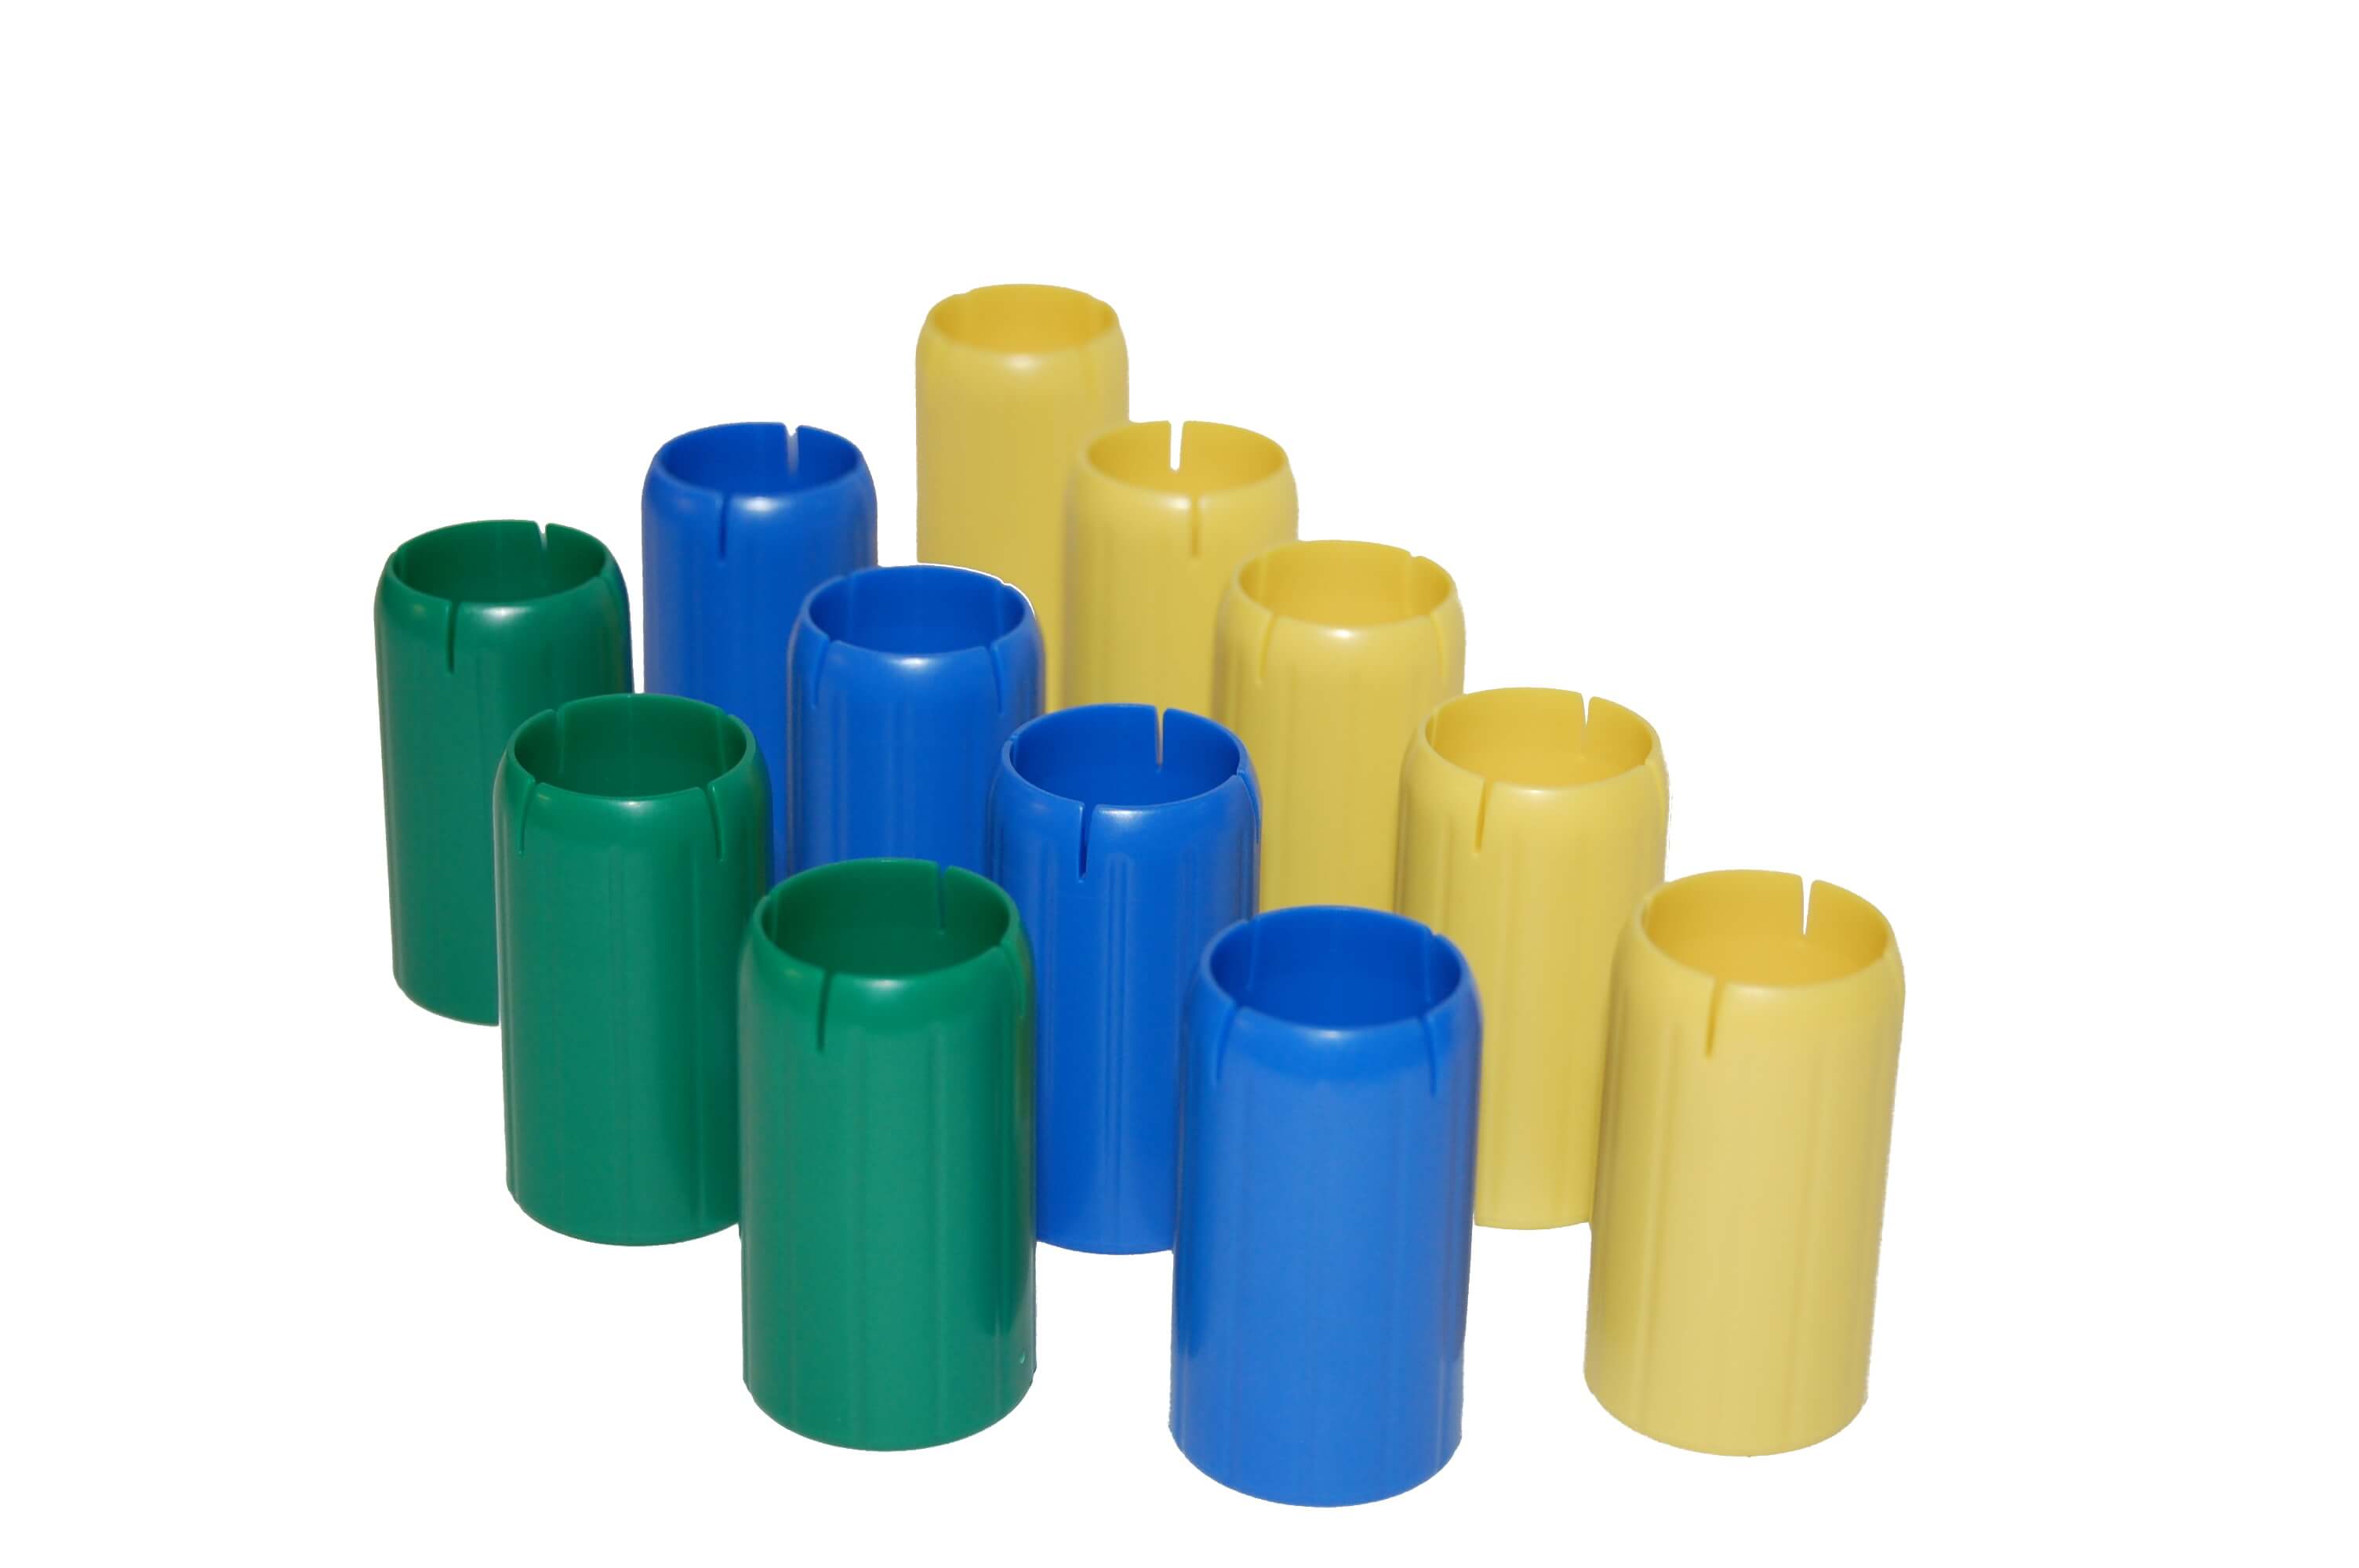 Colorful plastic injection molding services - low volume